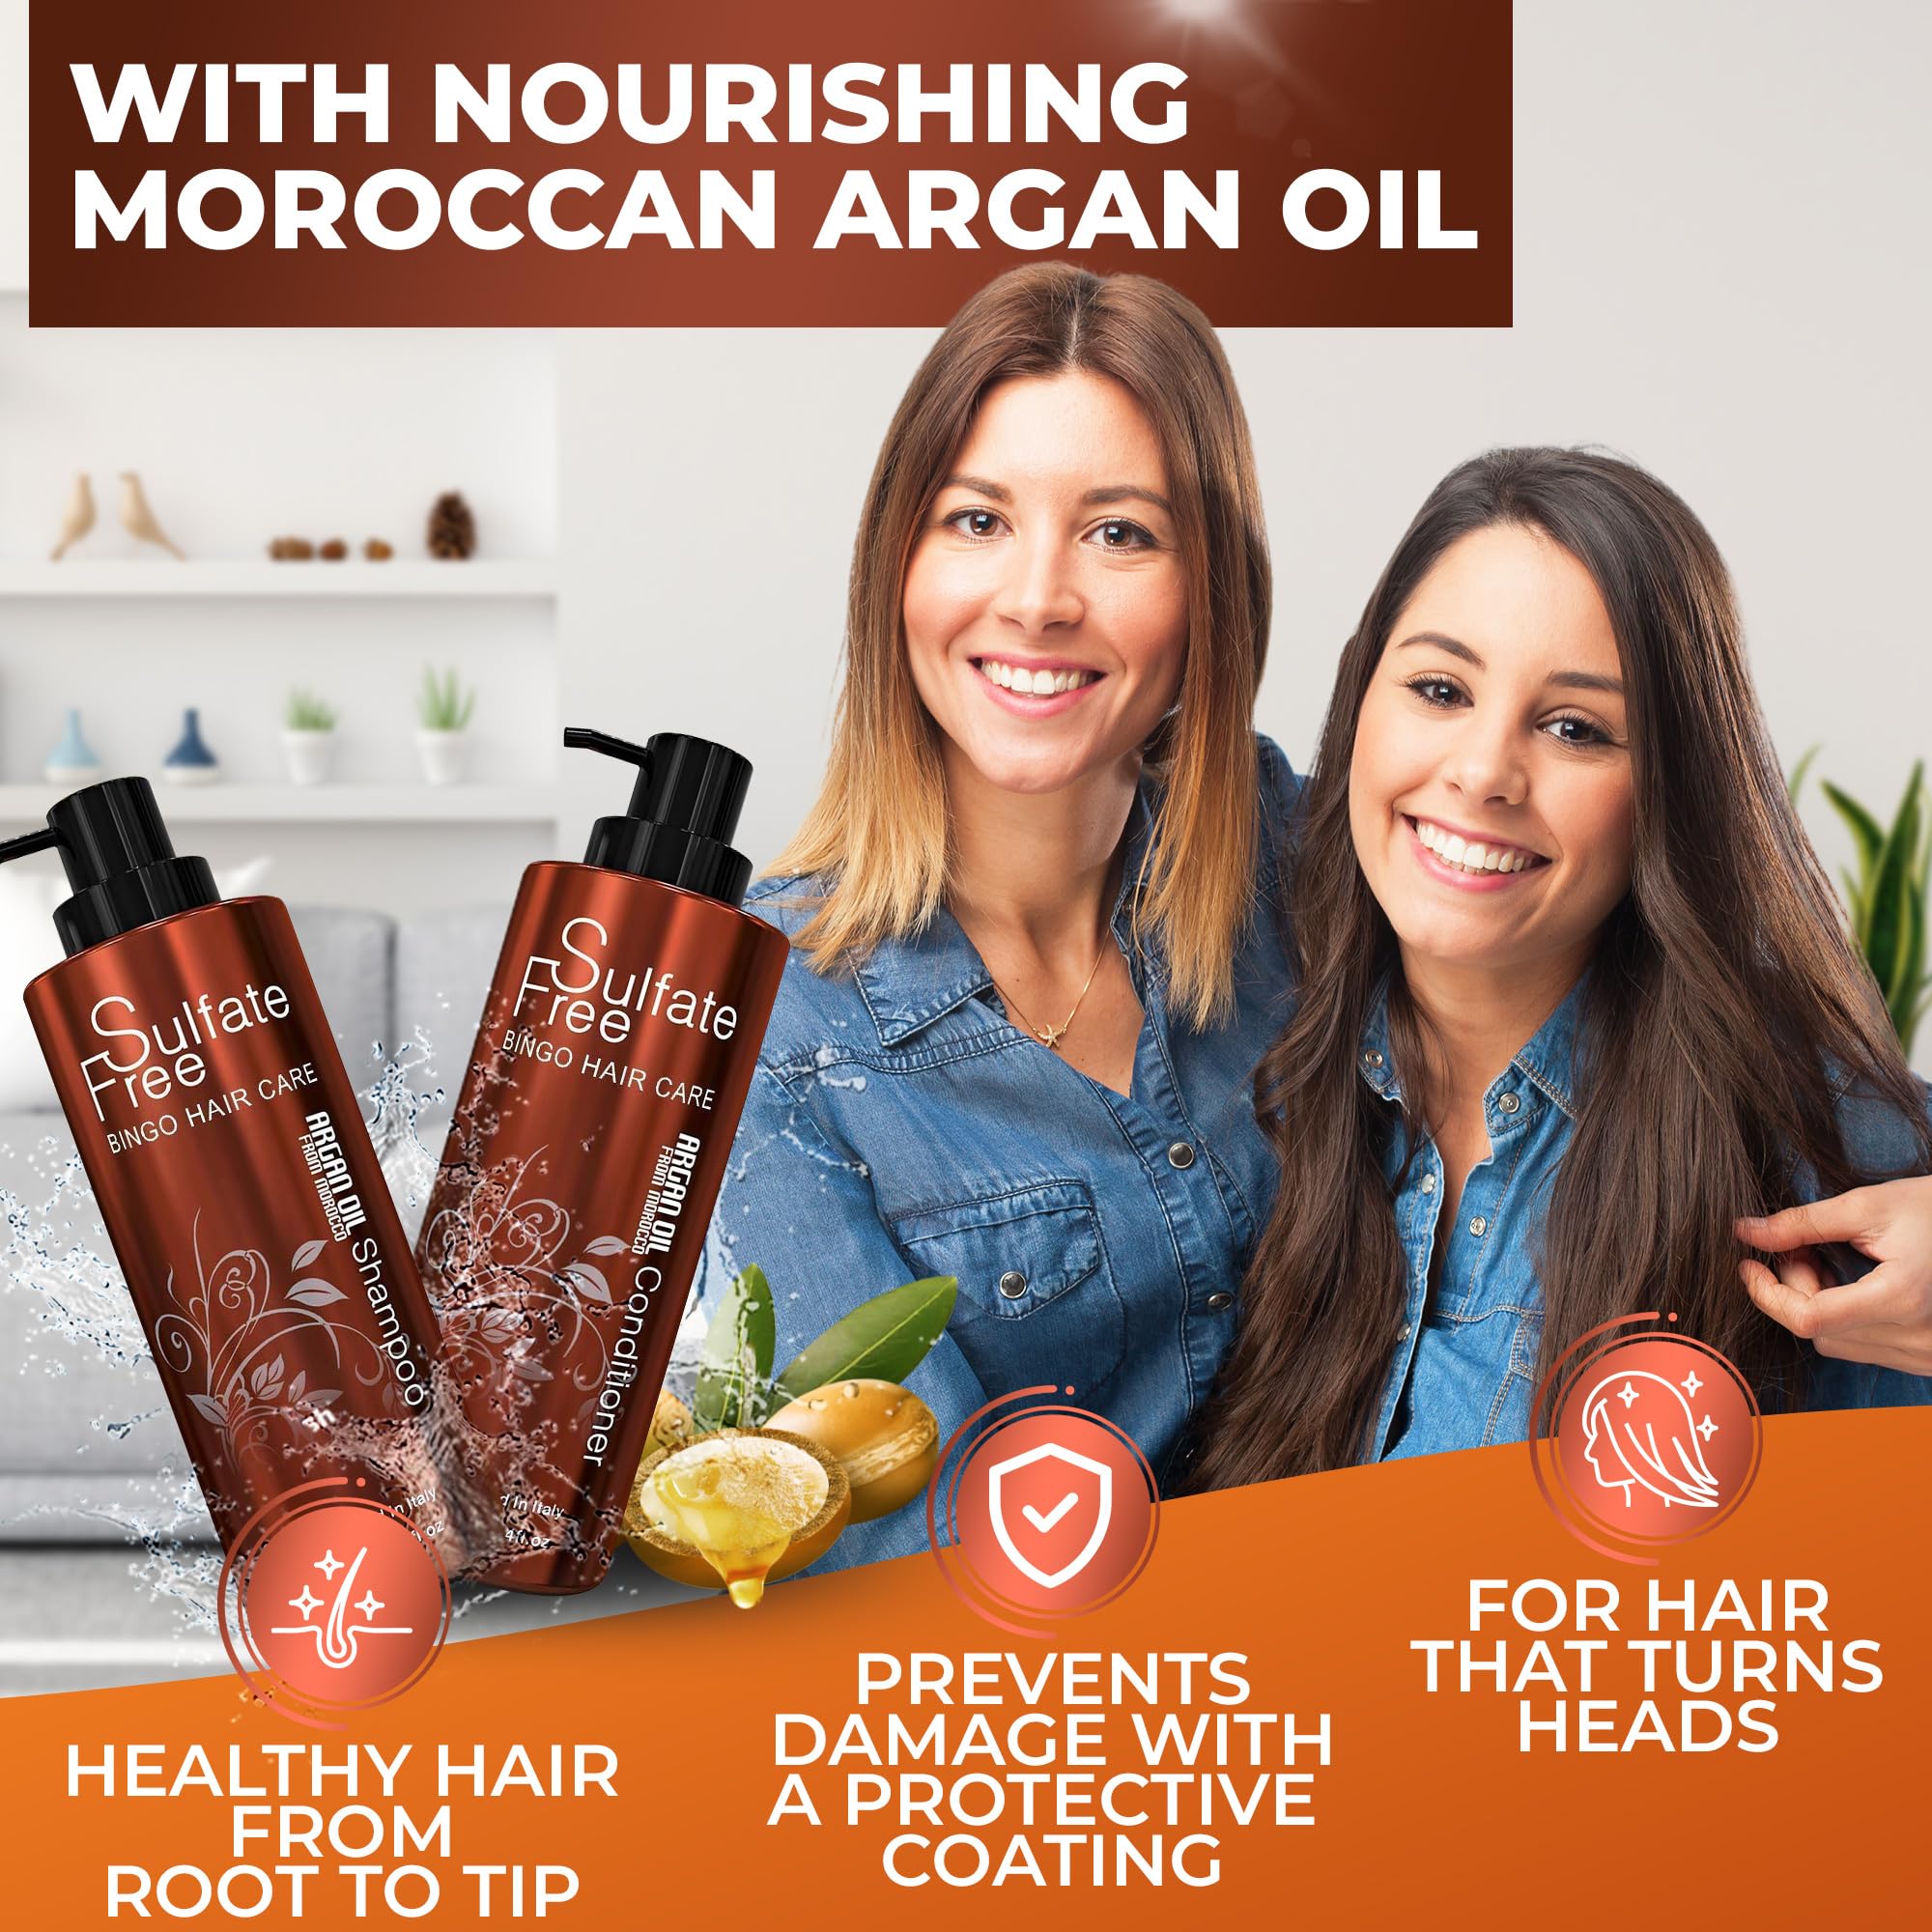 Moroccan Argan Oil Shampoo and Conditioner Set - Sulfate Free, Anti Frizz Hydrating Care for Women - Deep Moisturizing Treatment for Color, Keratin Treated, Curly, Damaged and Dry Hair